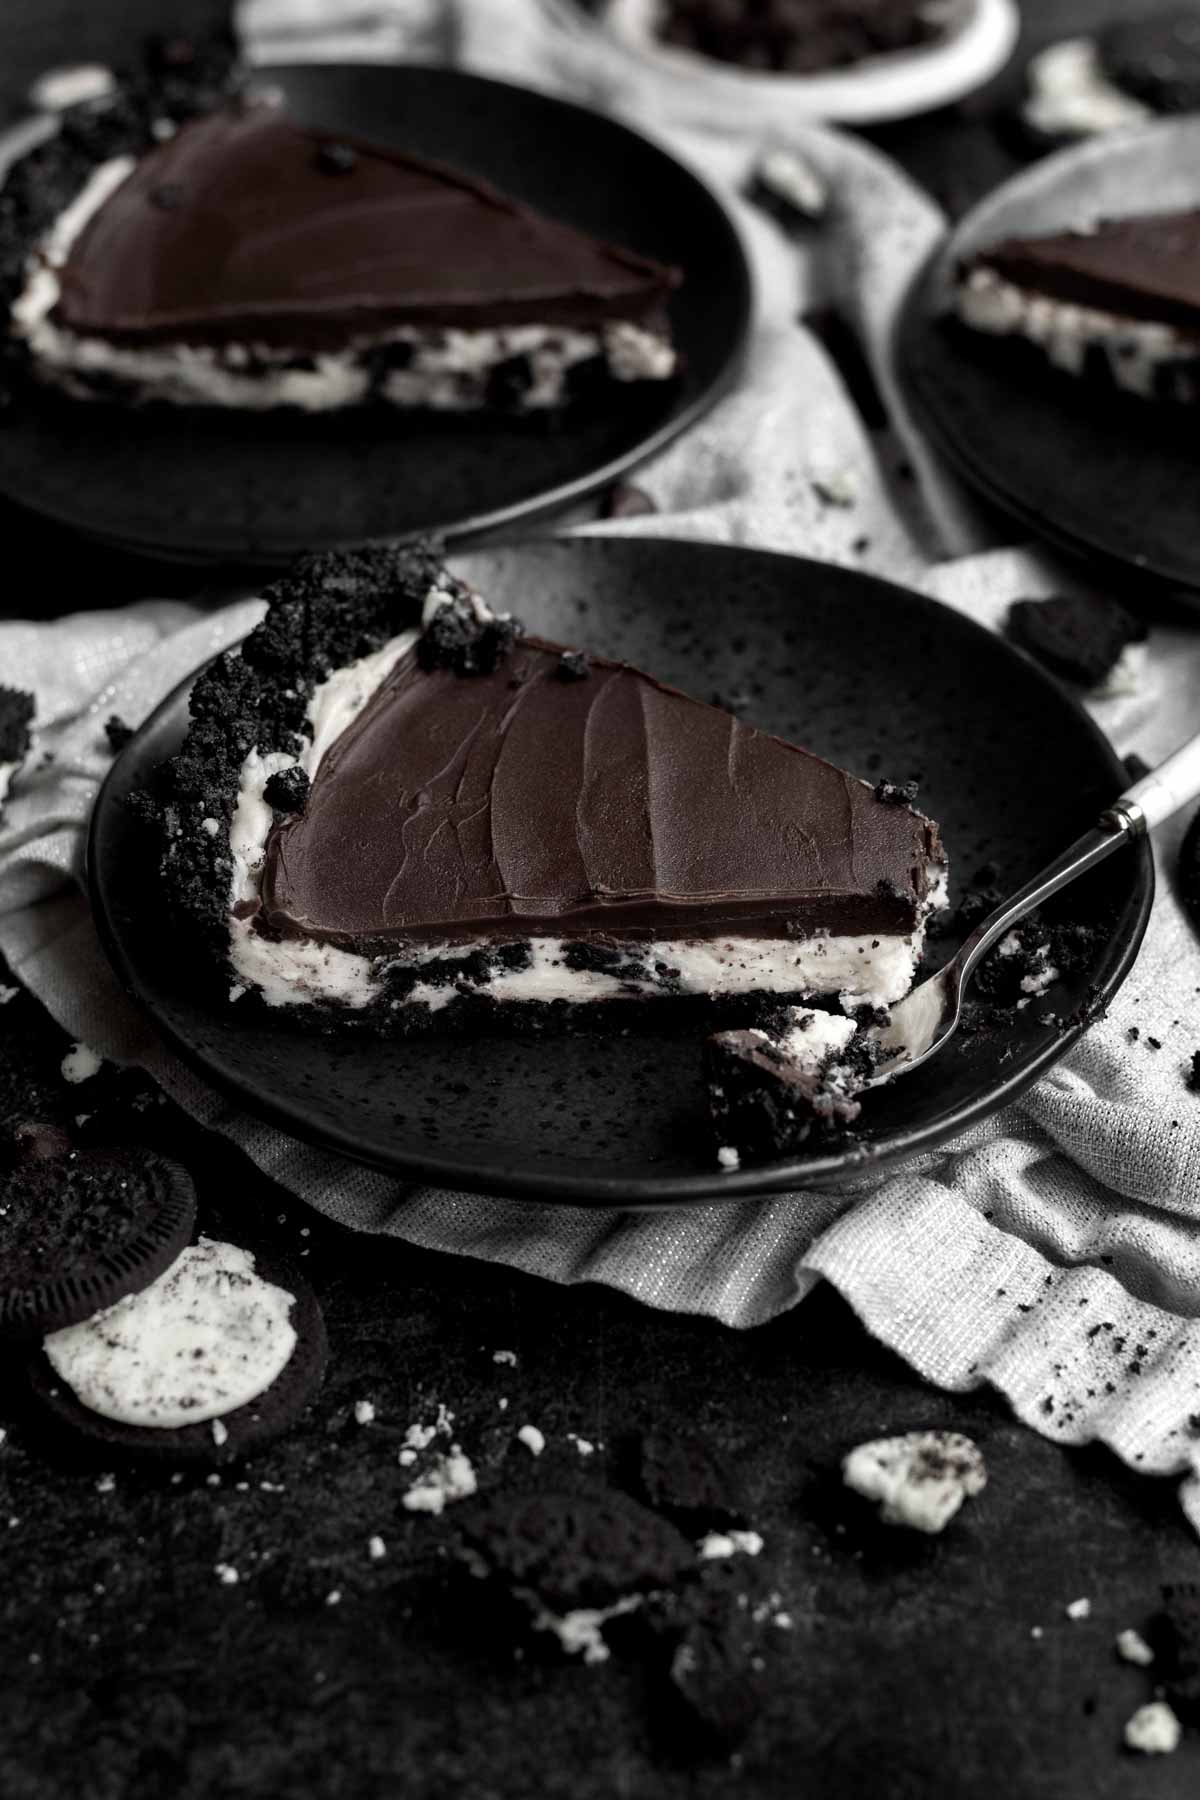 A slice of Cookies and Cream Pie on a black plate.